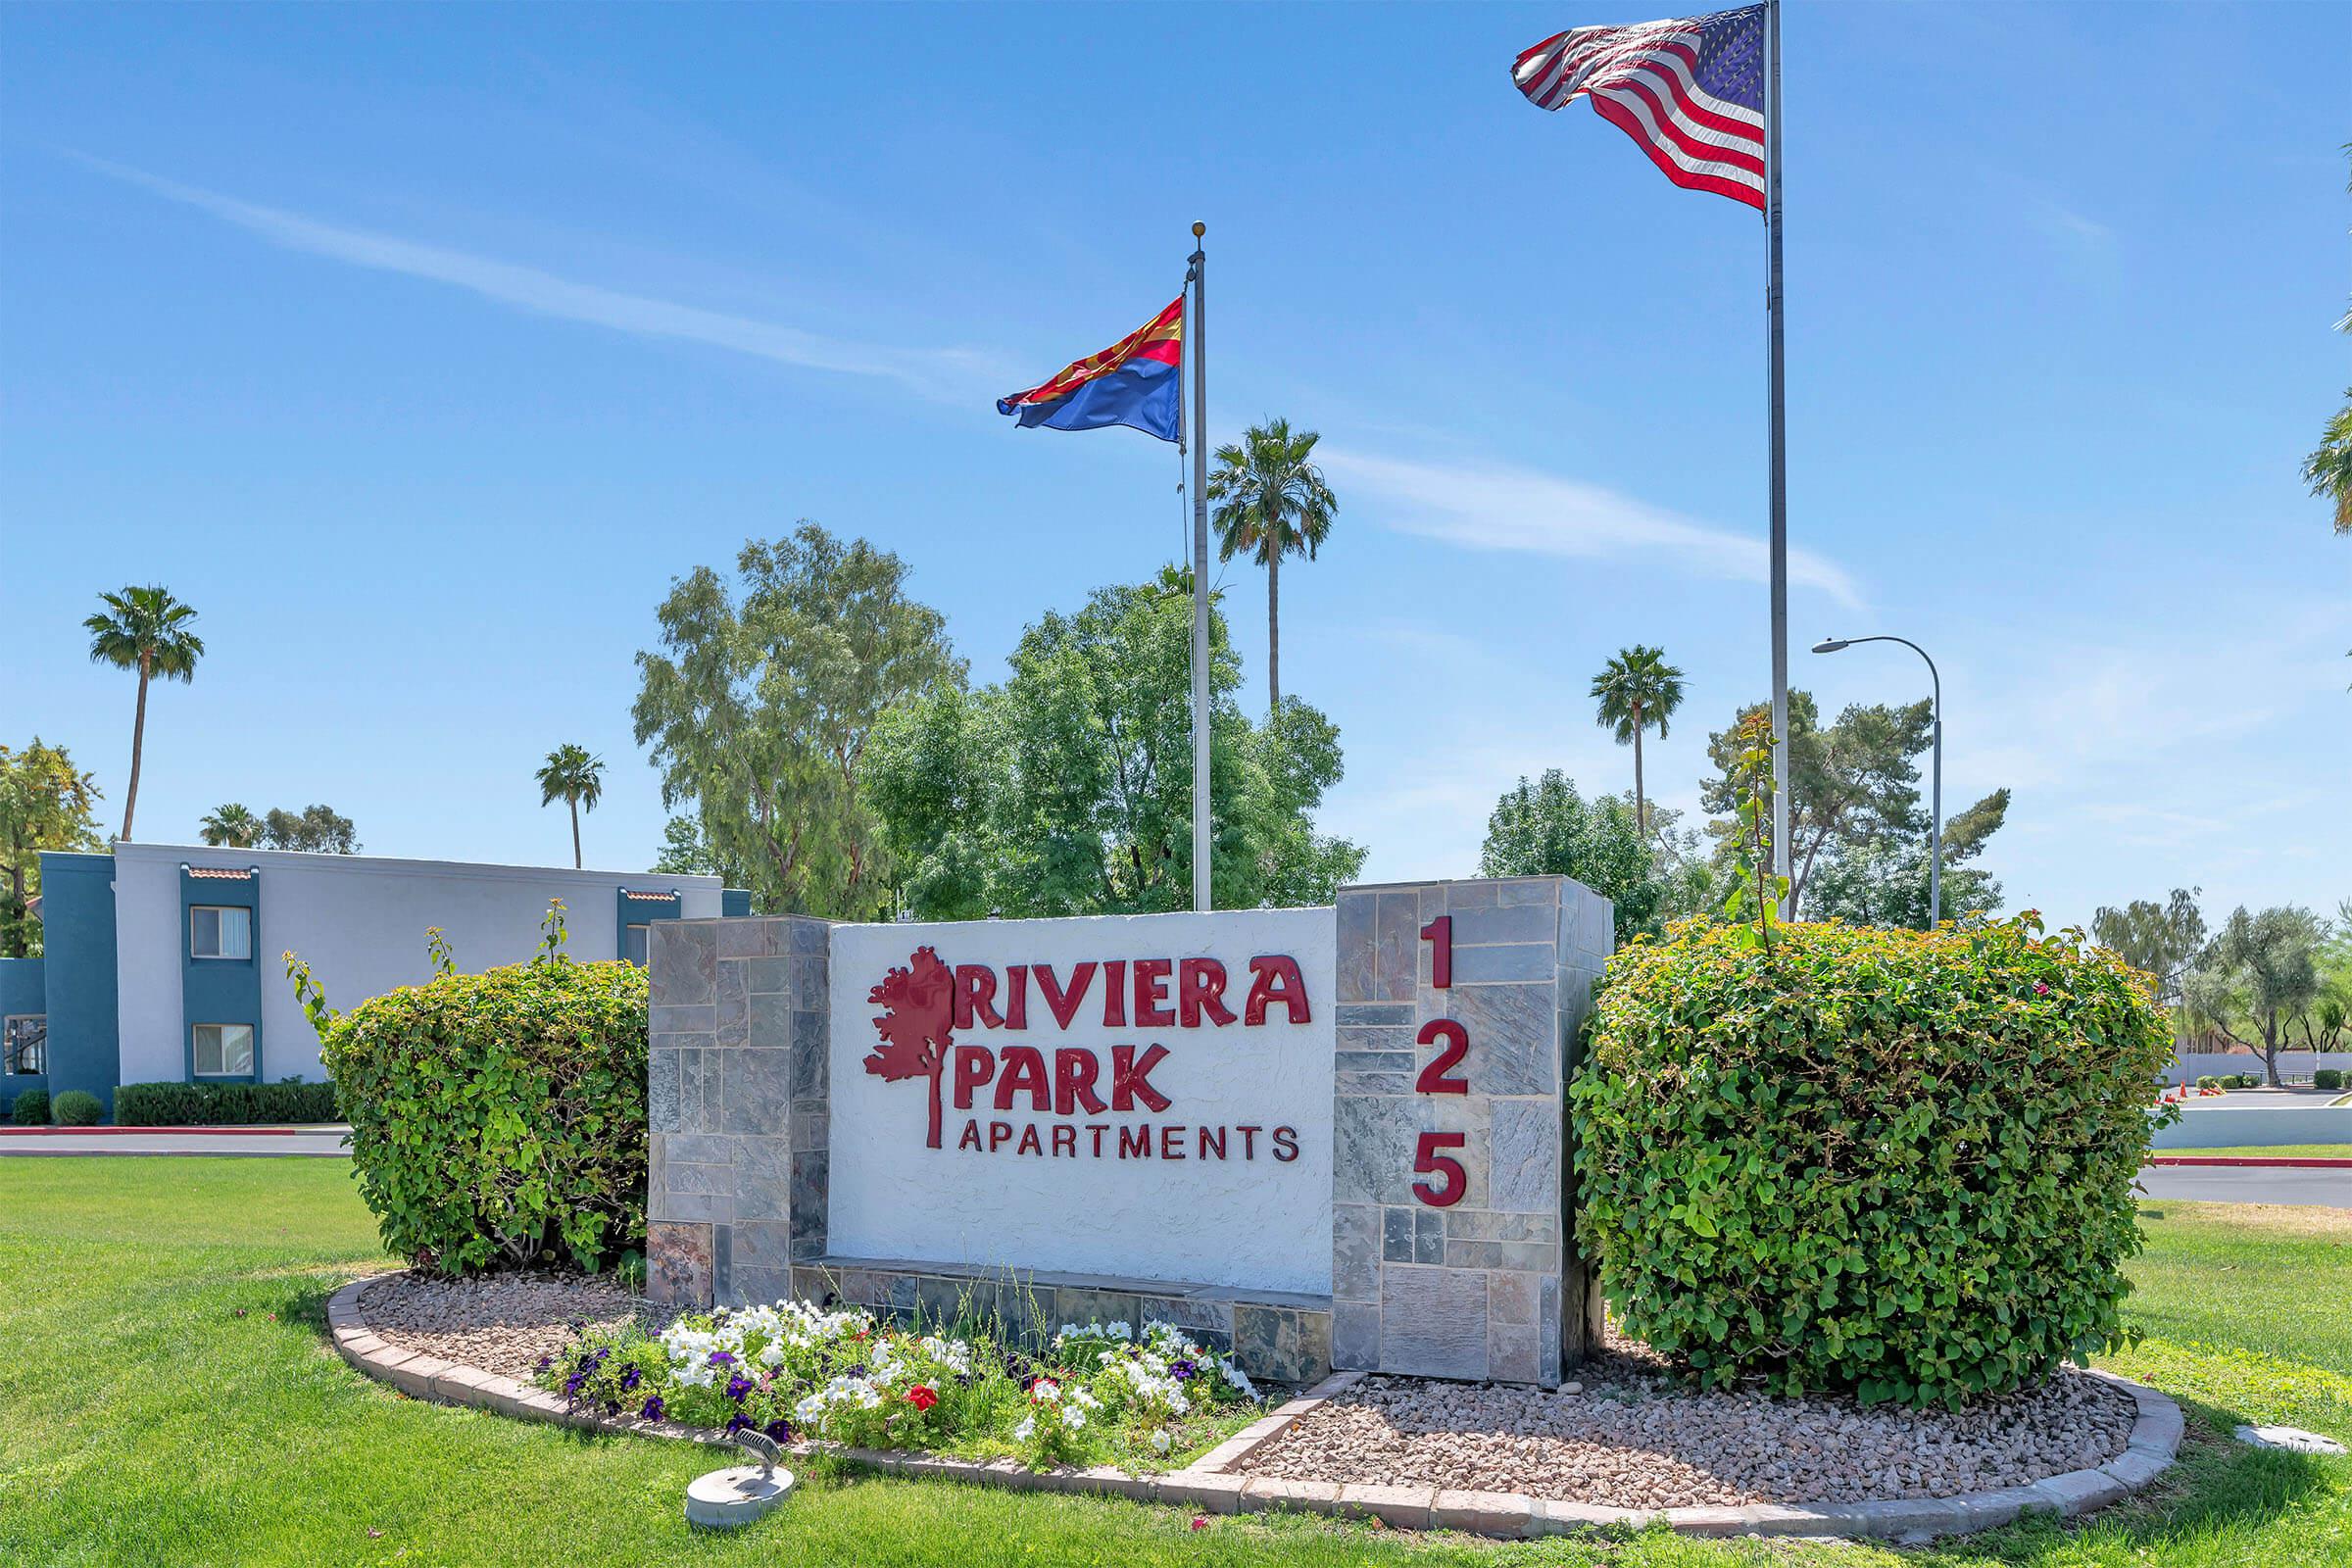 GIVE RIVIERA PARK A CALL TODAY AT 480-963-3092